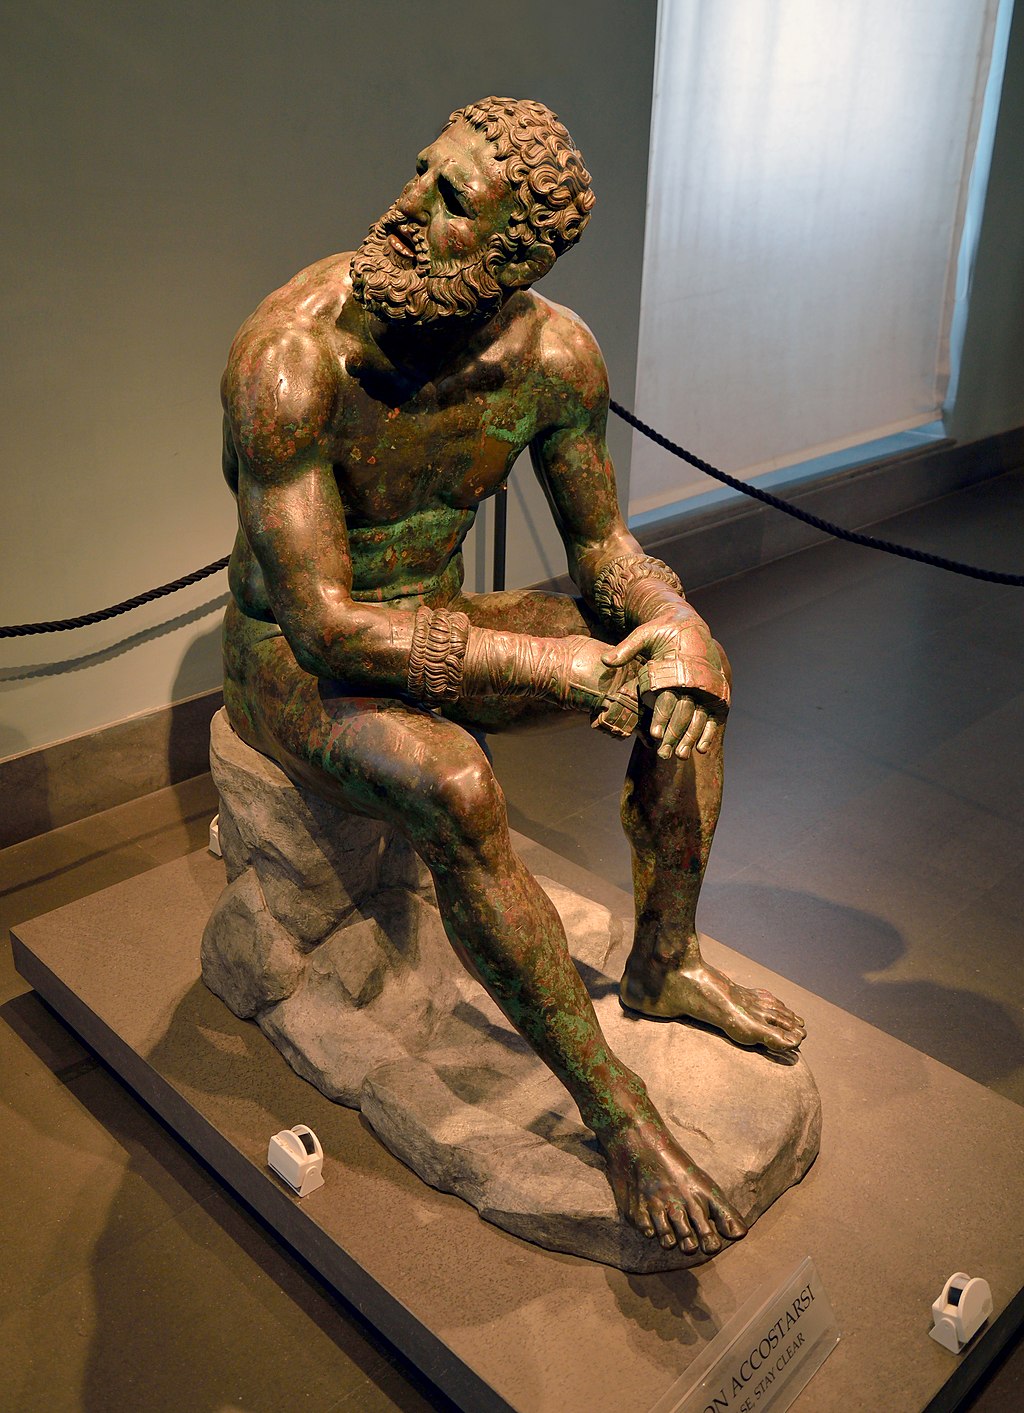 Boxer at Rest, c. 330-50 BCE, Palazzo Massimo alle Terme, Rome, Italy. source: Wikimedia Commons